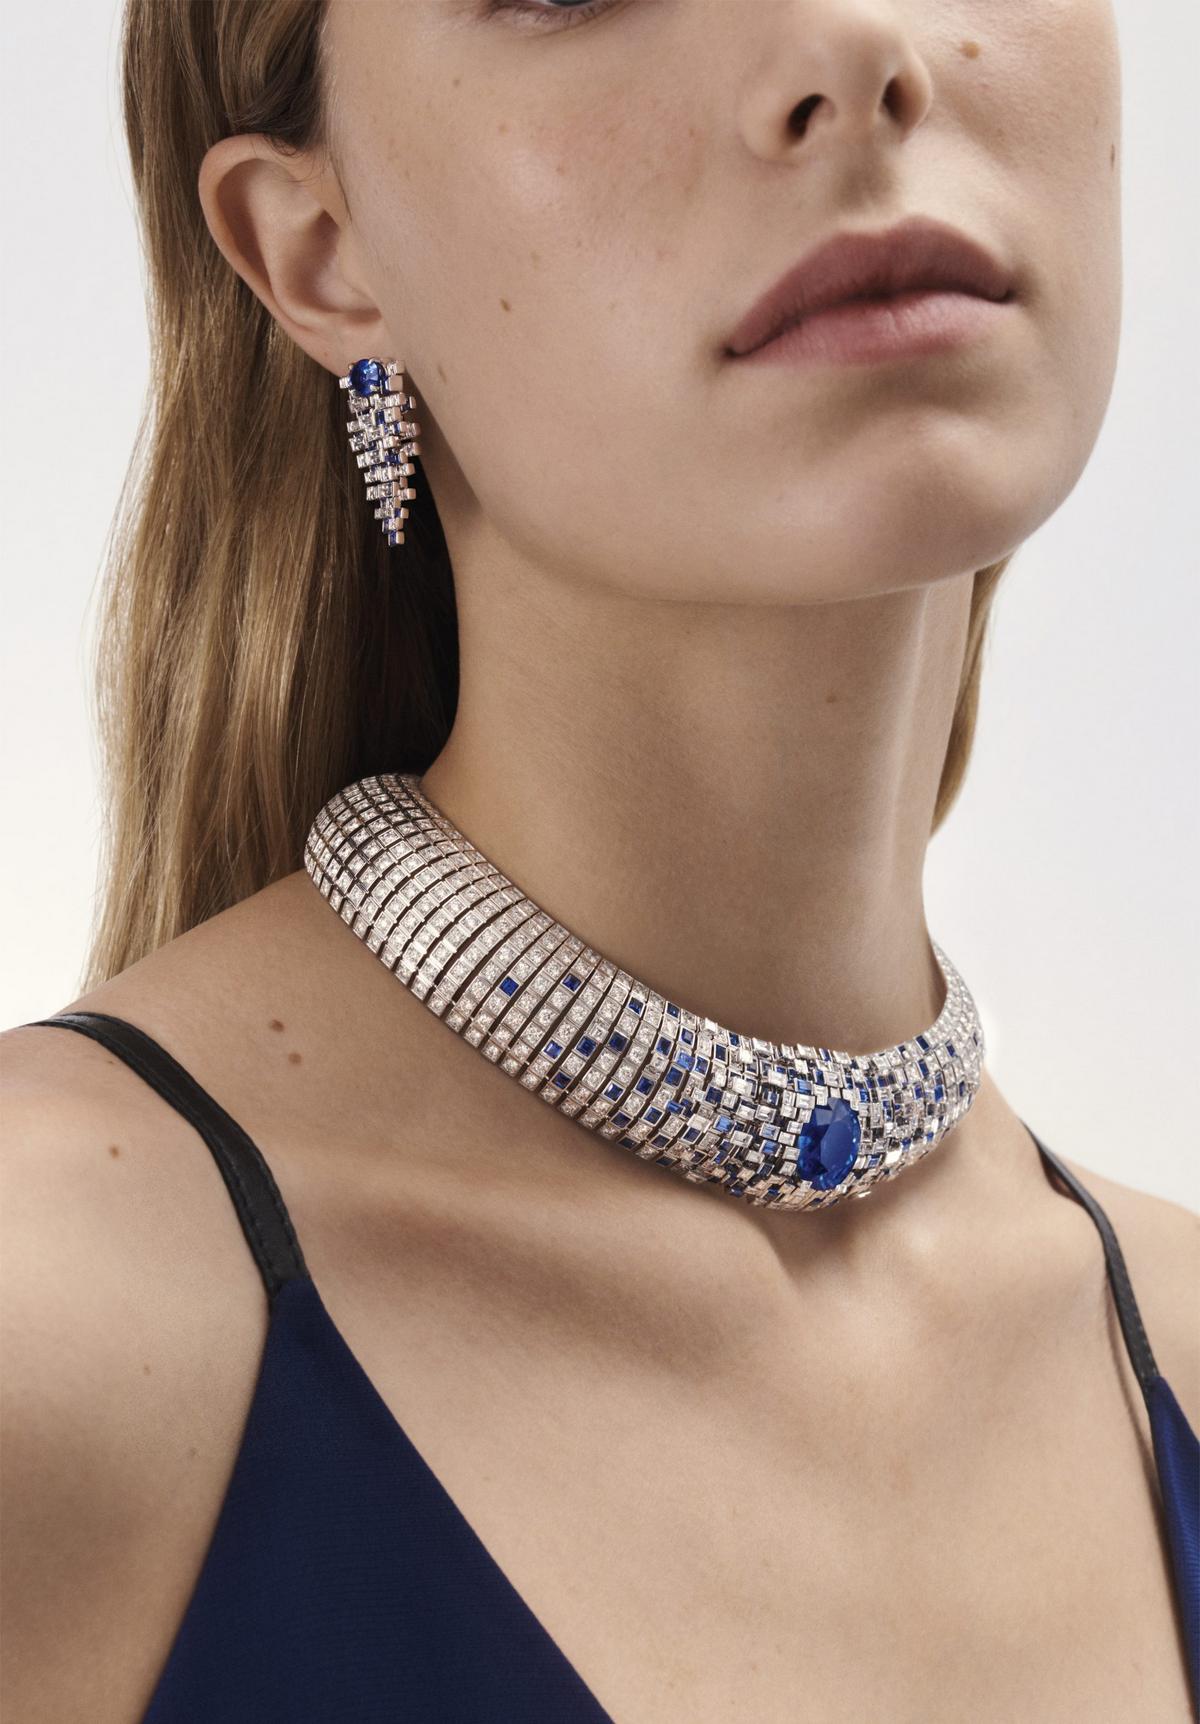 Louis Vuitton's newest high jewelry collection celebrates space